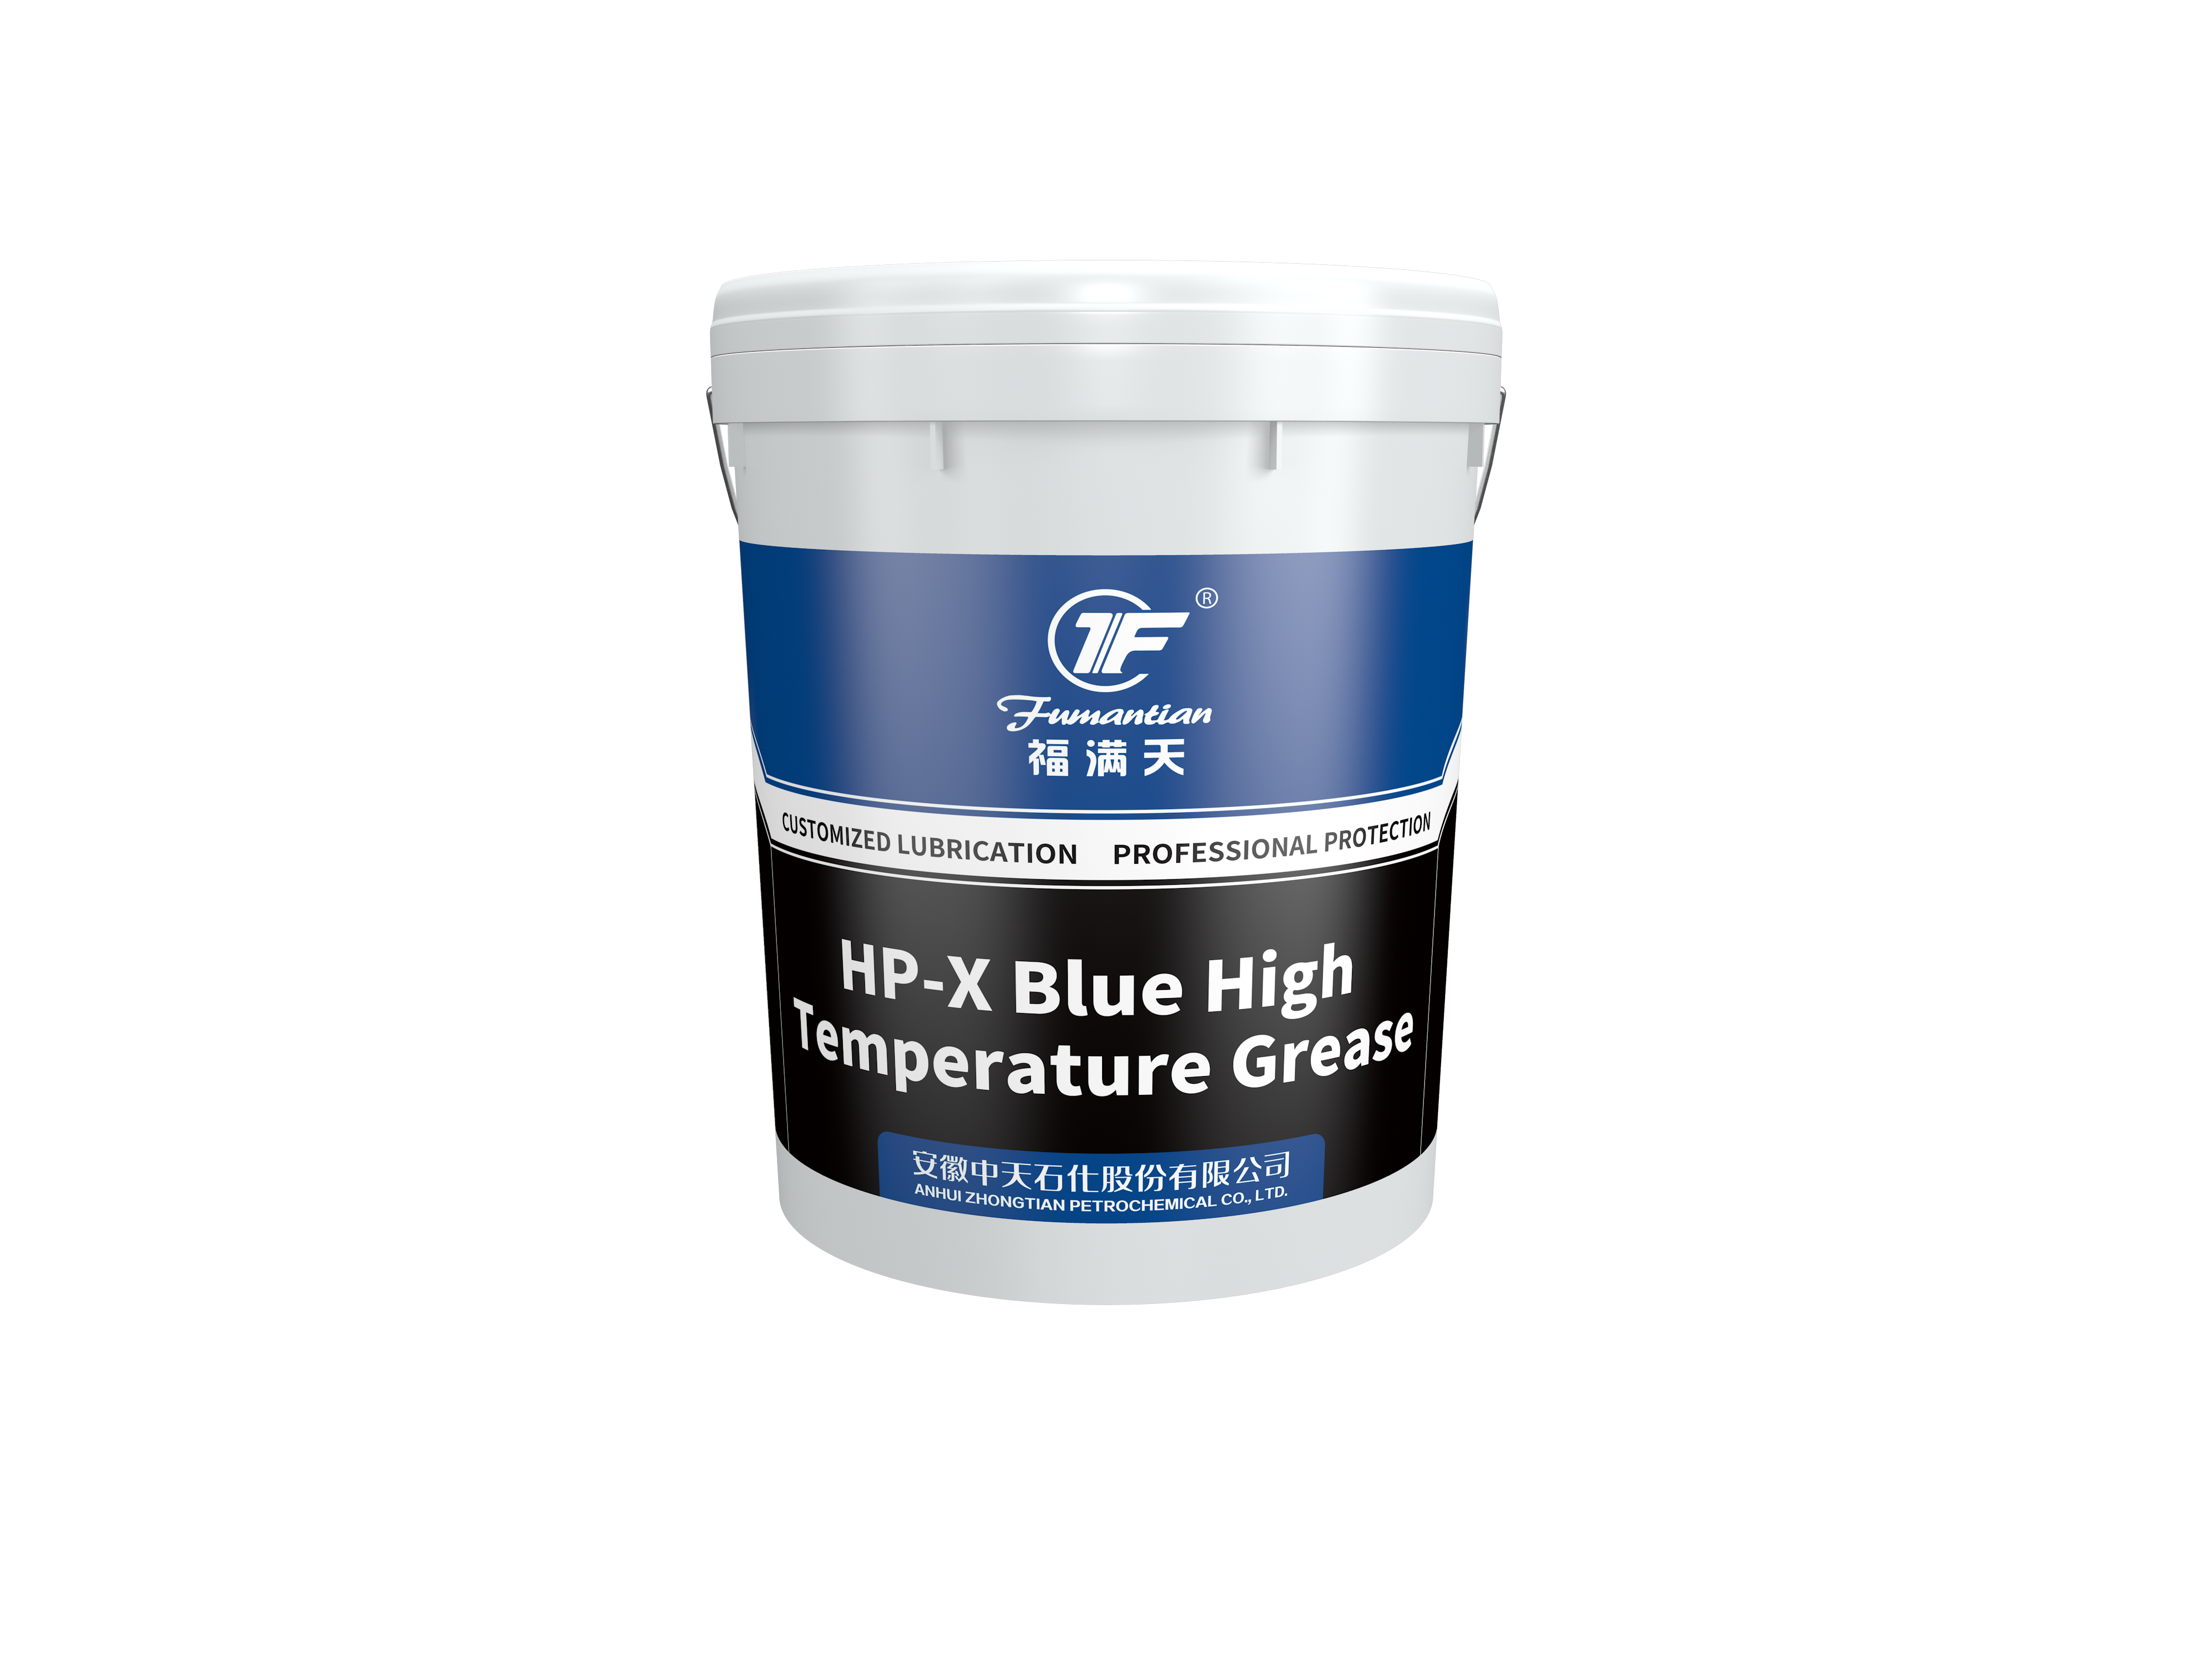 HP-X Blue High Temperature Grease